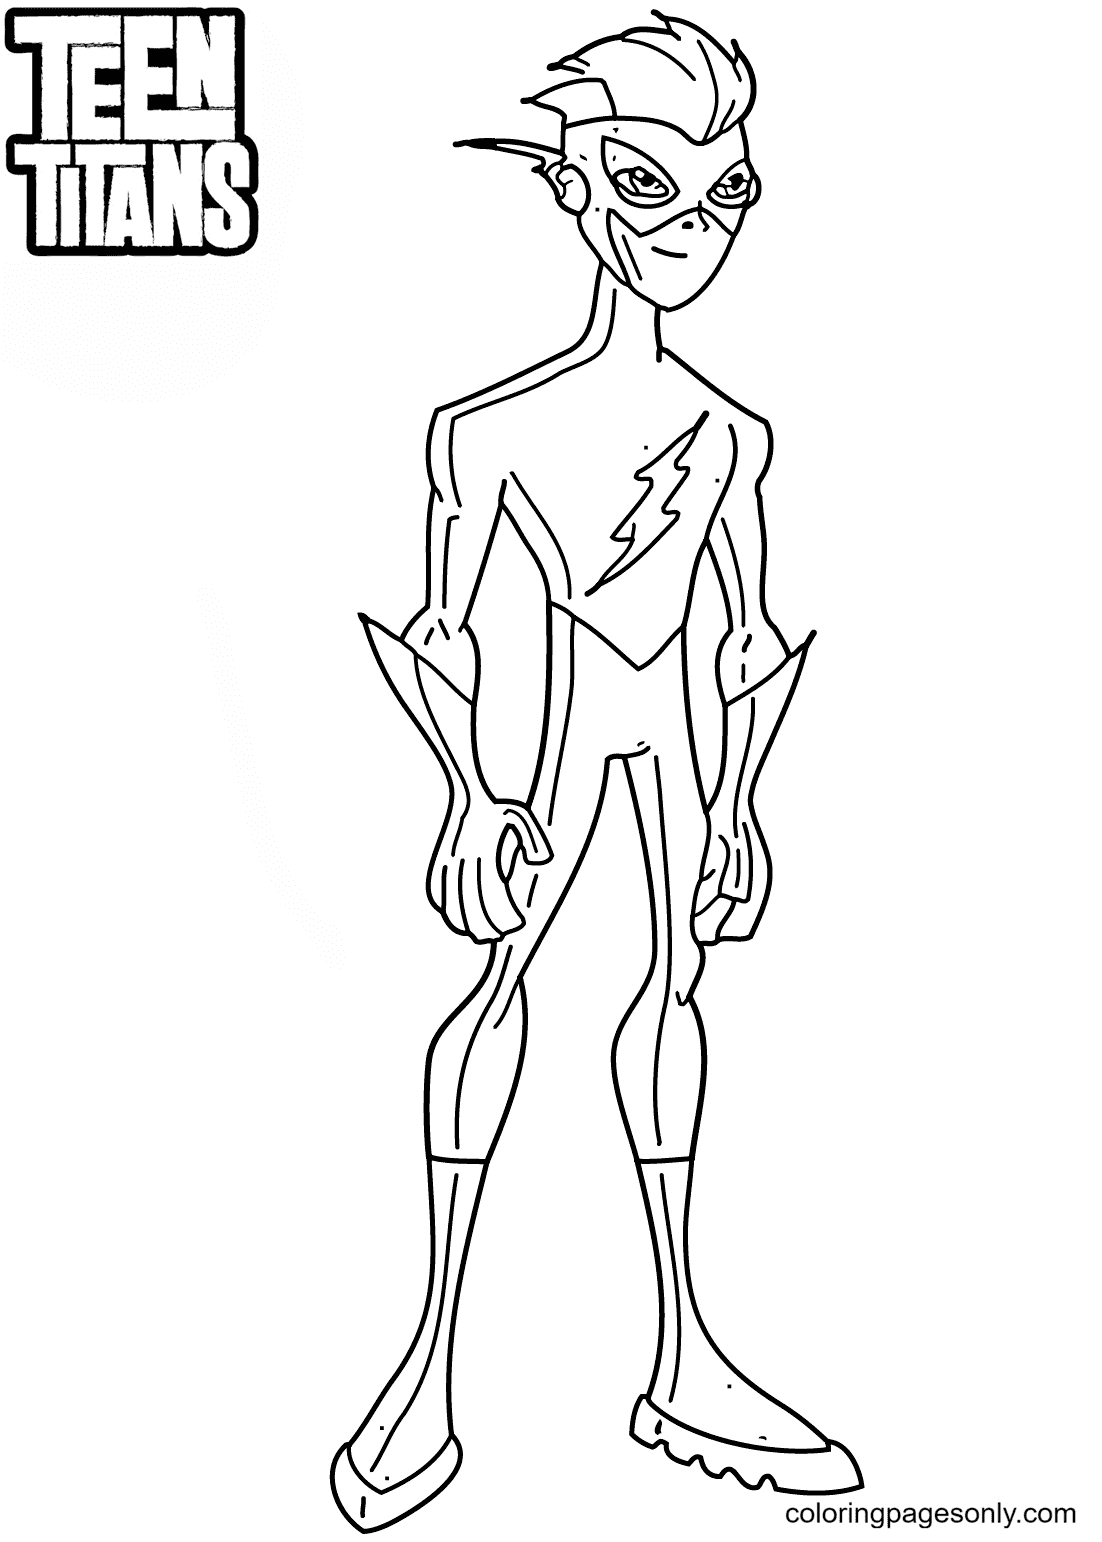 Teen Titans Kid Flash Coloring Pages